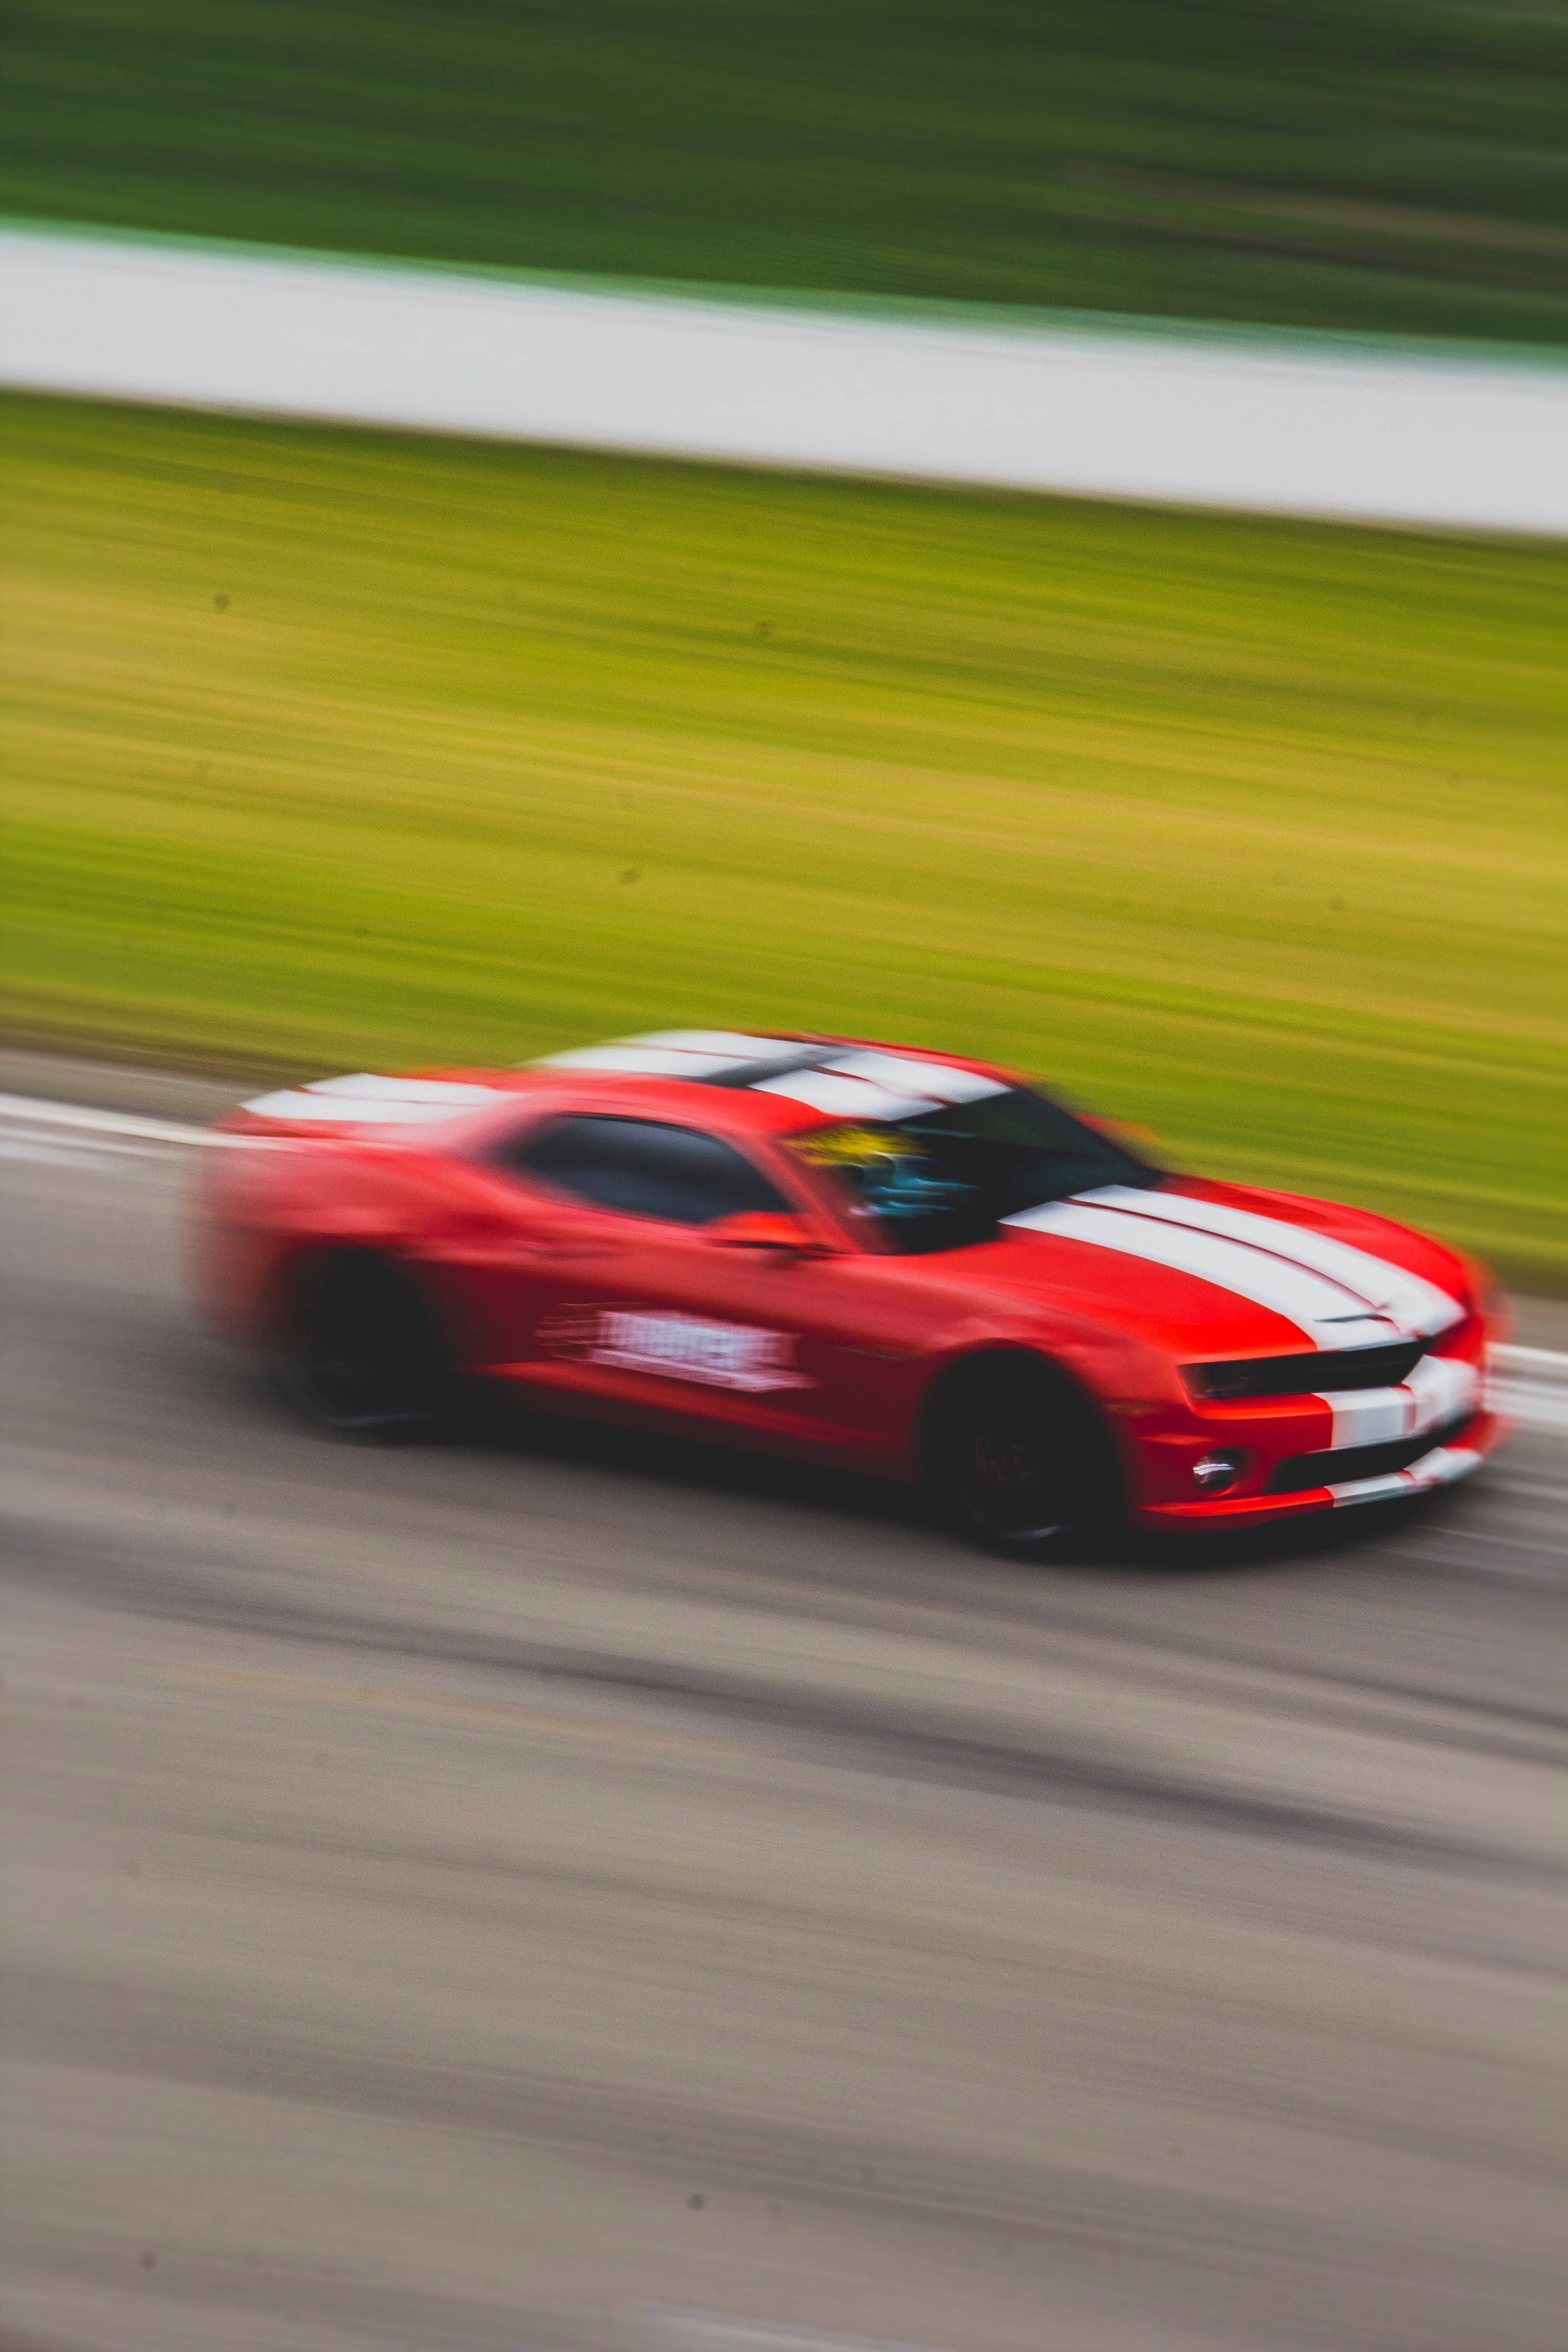 Red And White Racecar Speed Iphone Wallpaper